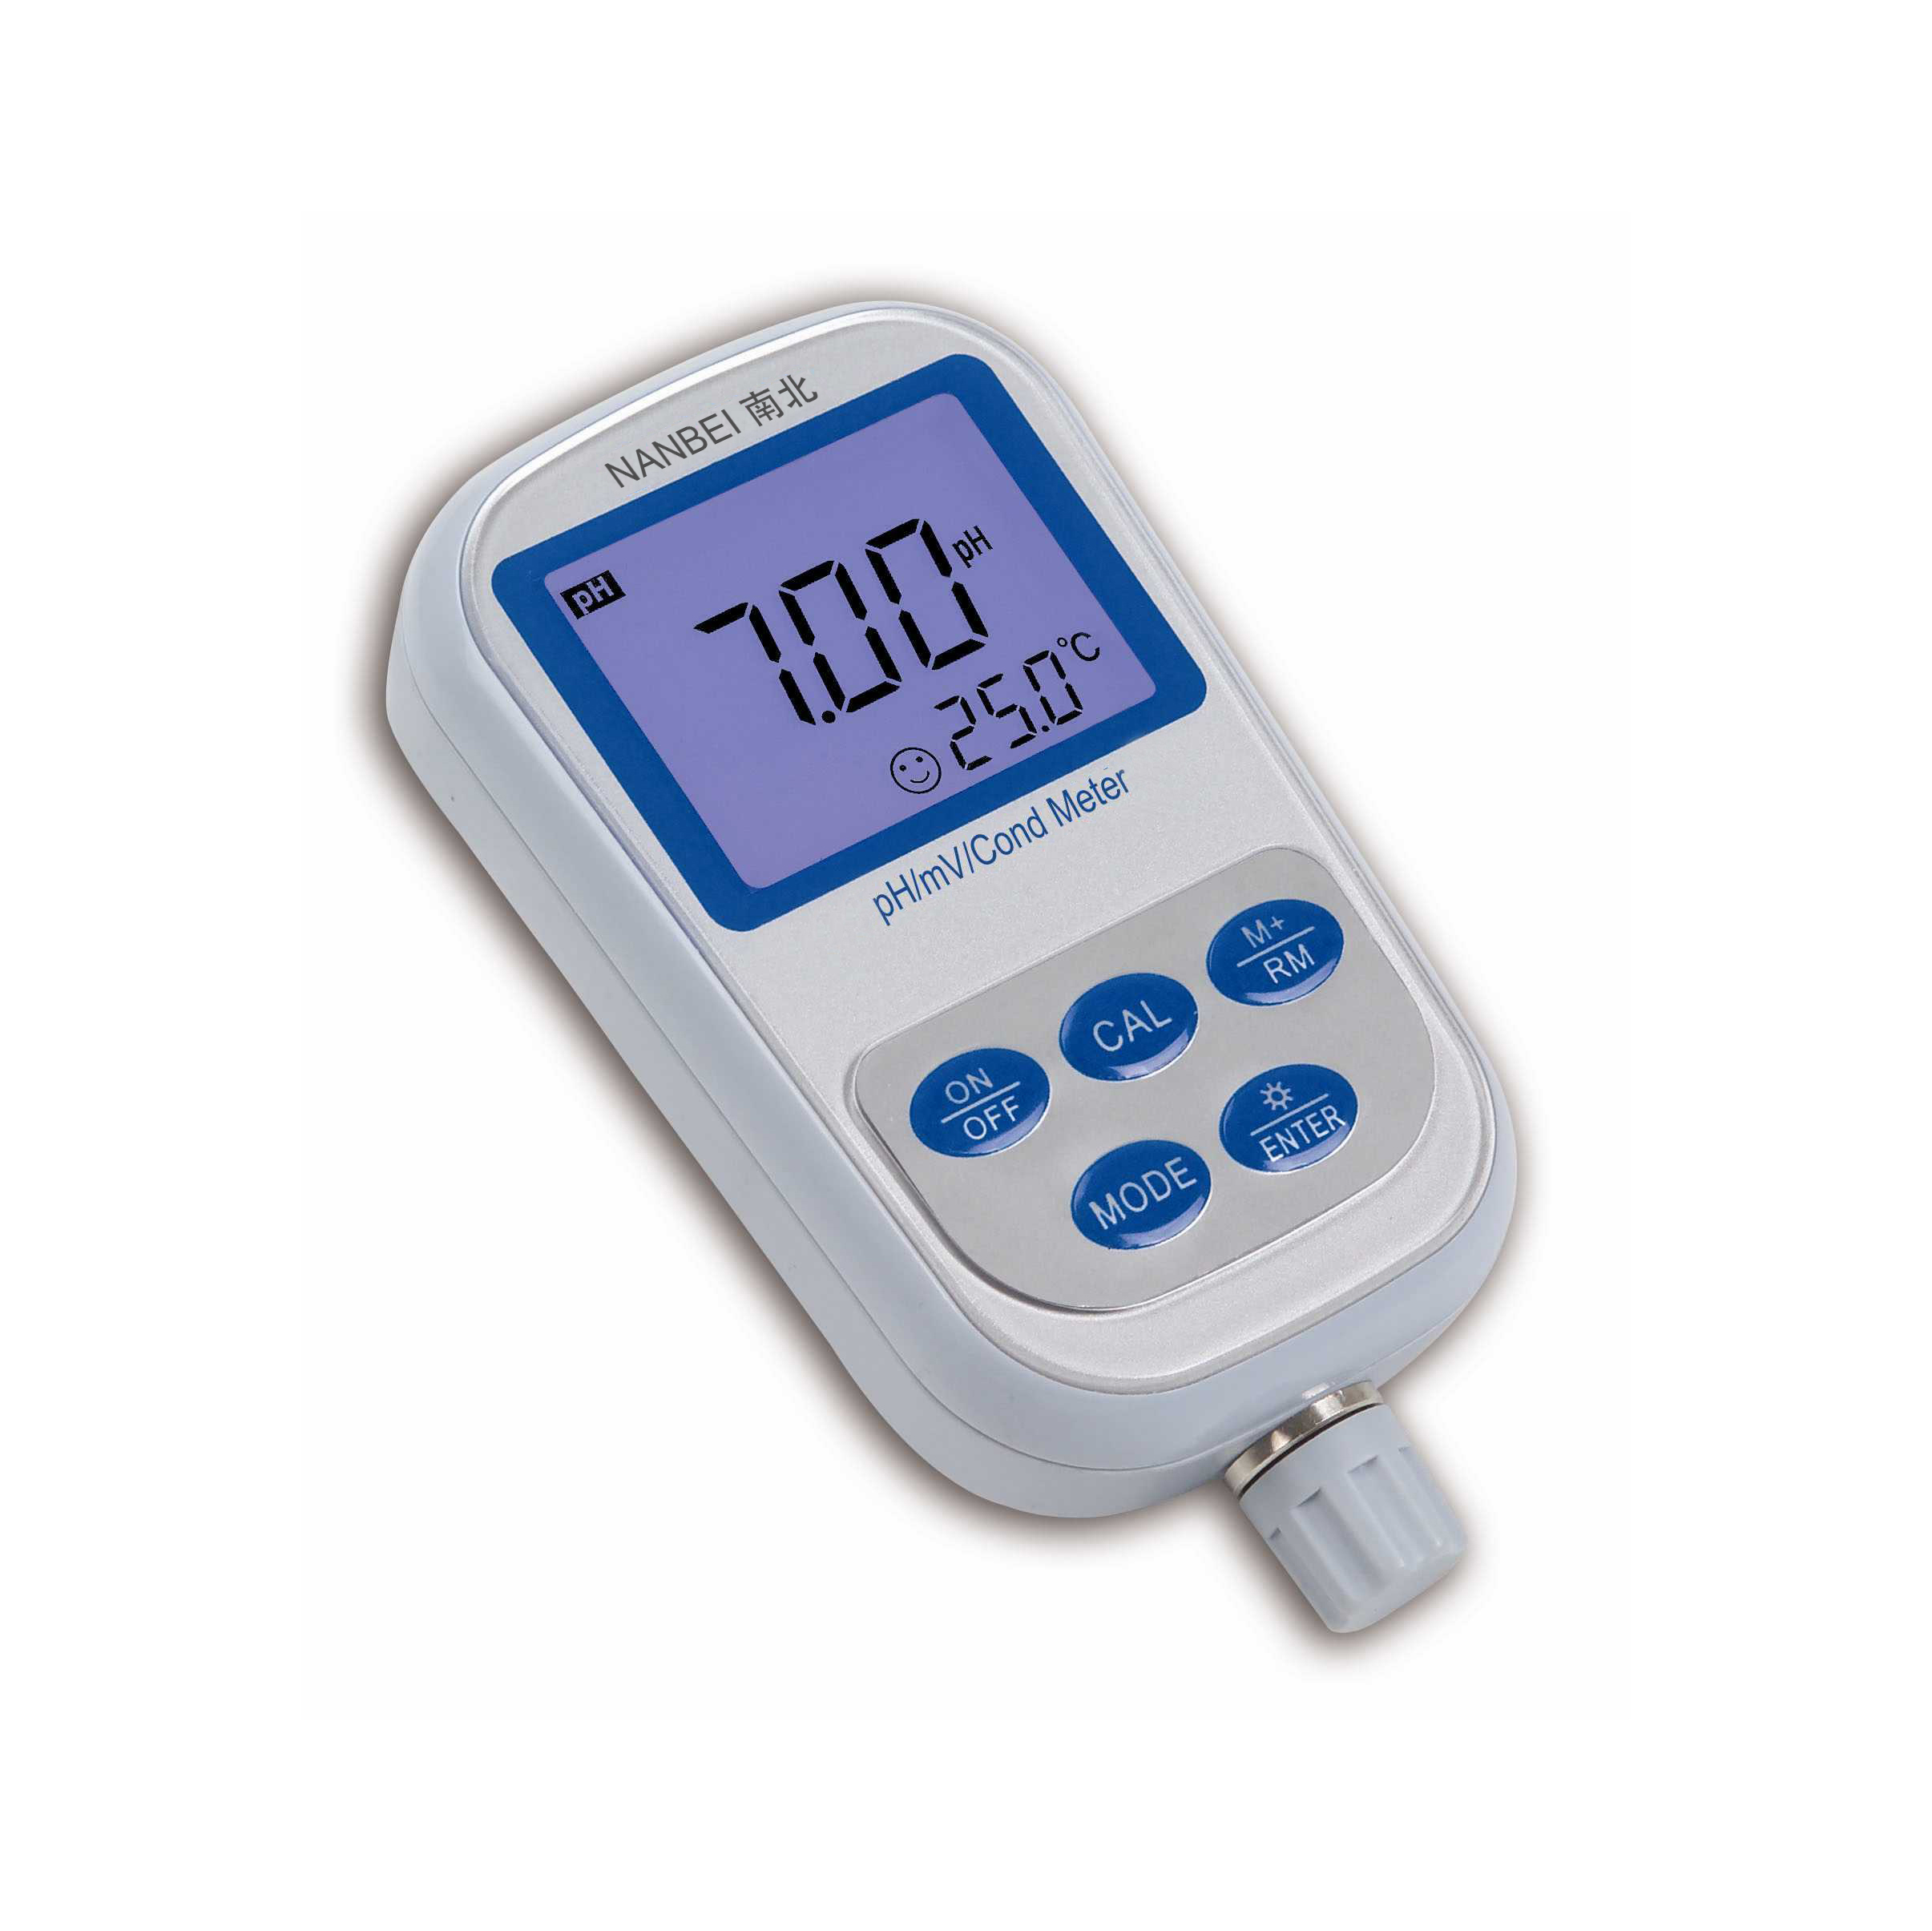 SX713 Portable Conductivity/ TDS/Sal./Res.Meter